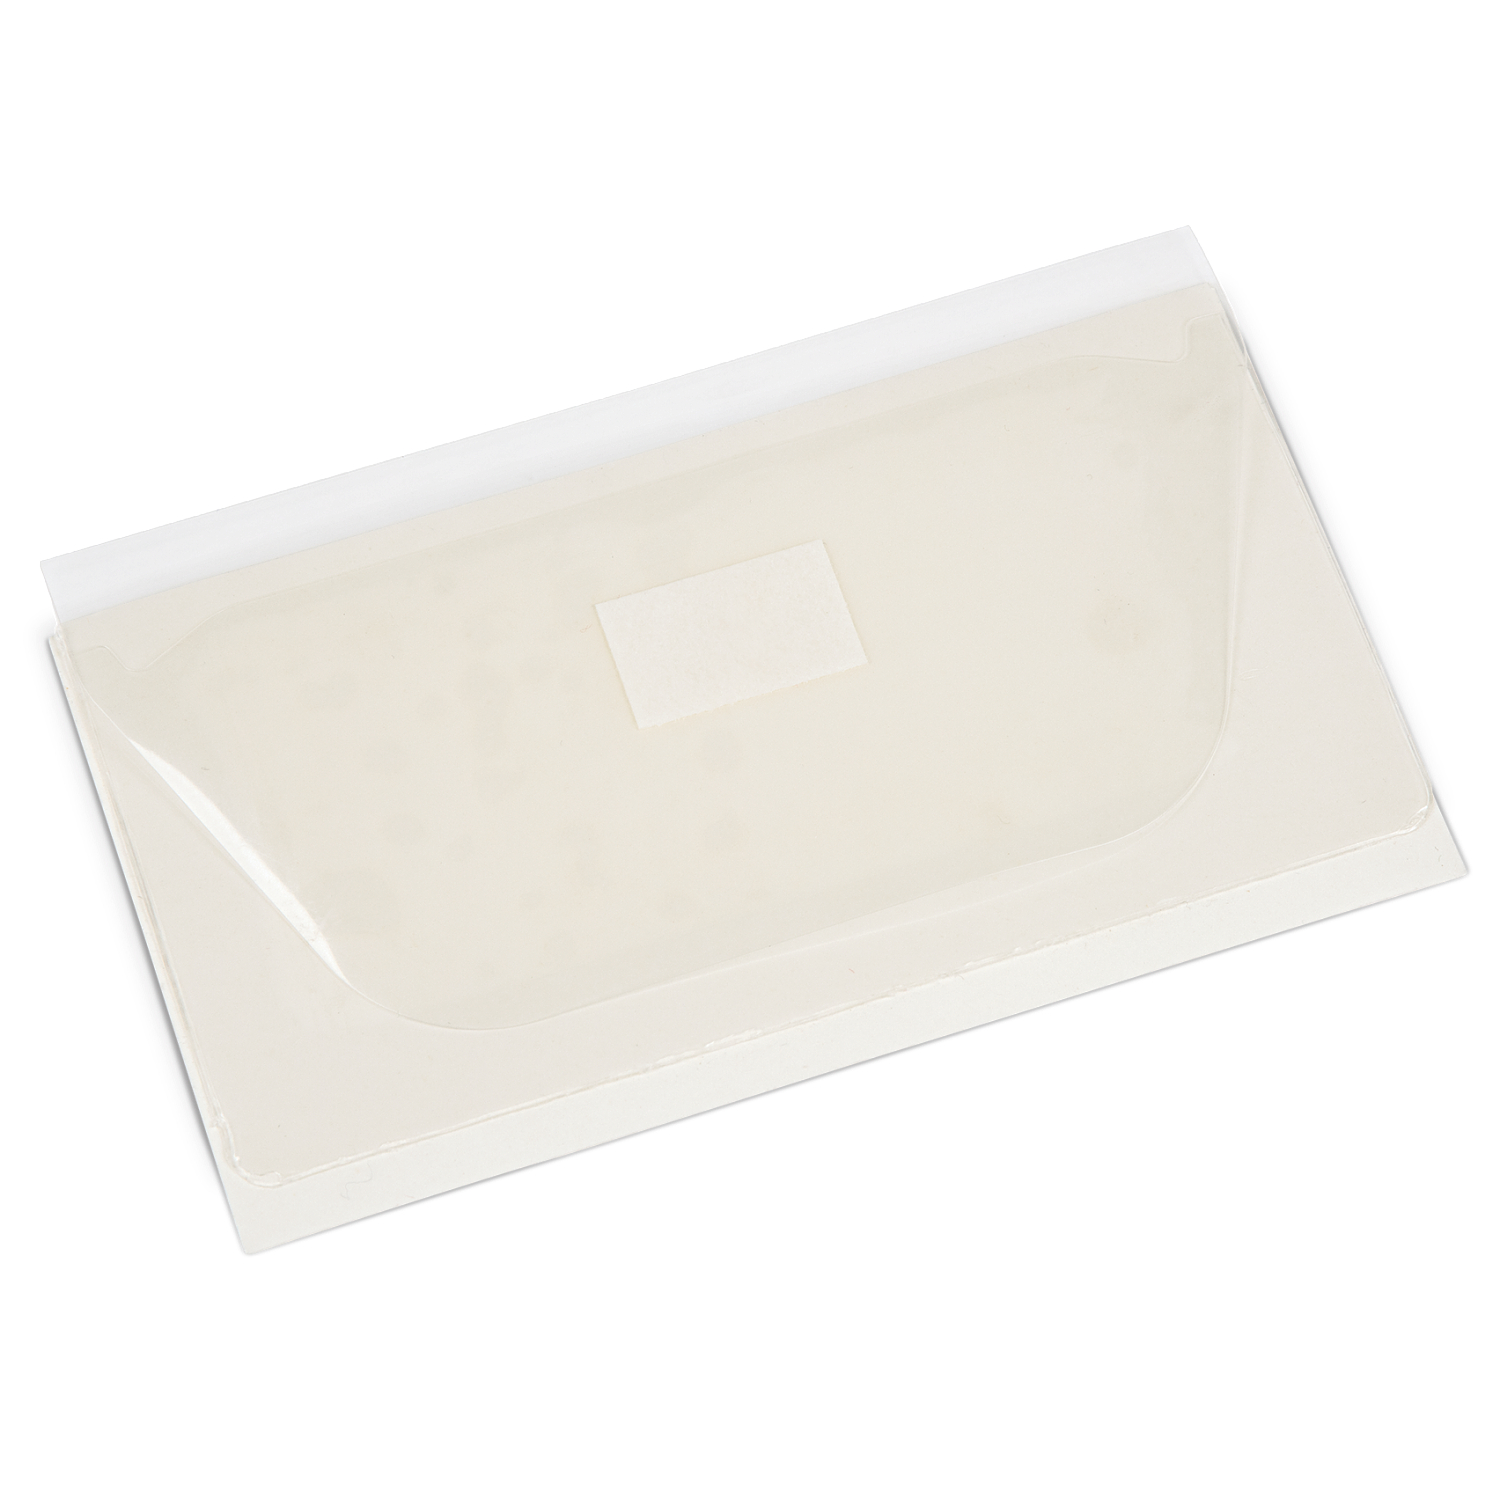 Lineco Polypropylene Sleeve with Easy Locking Side Flap 11x14 - 25 Pack